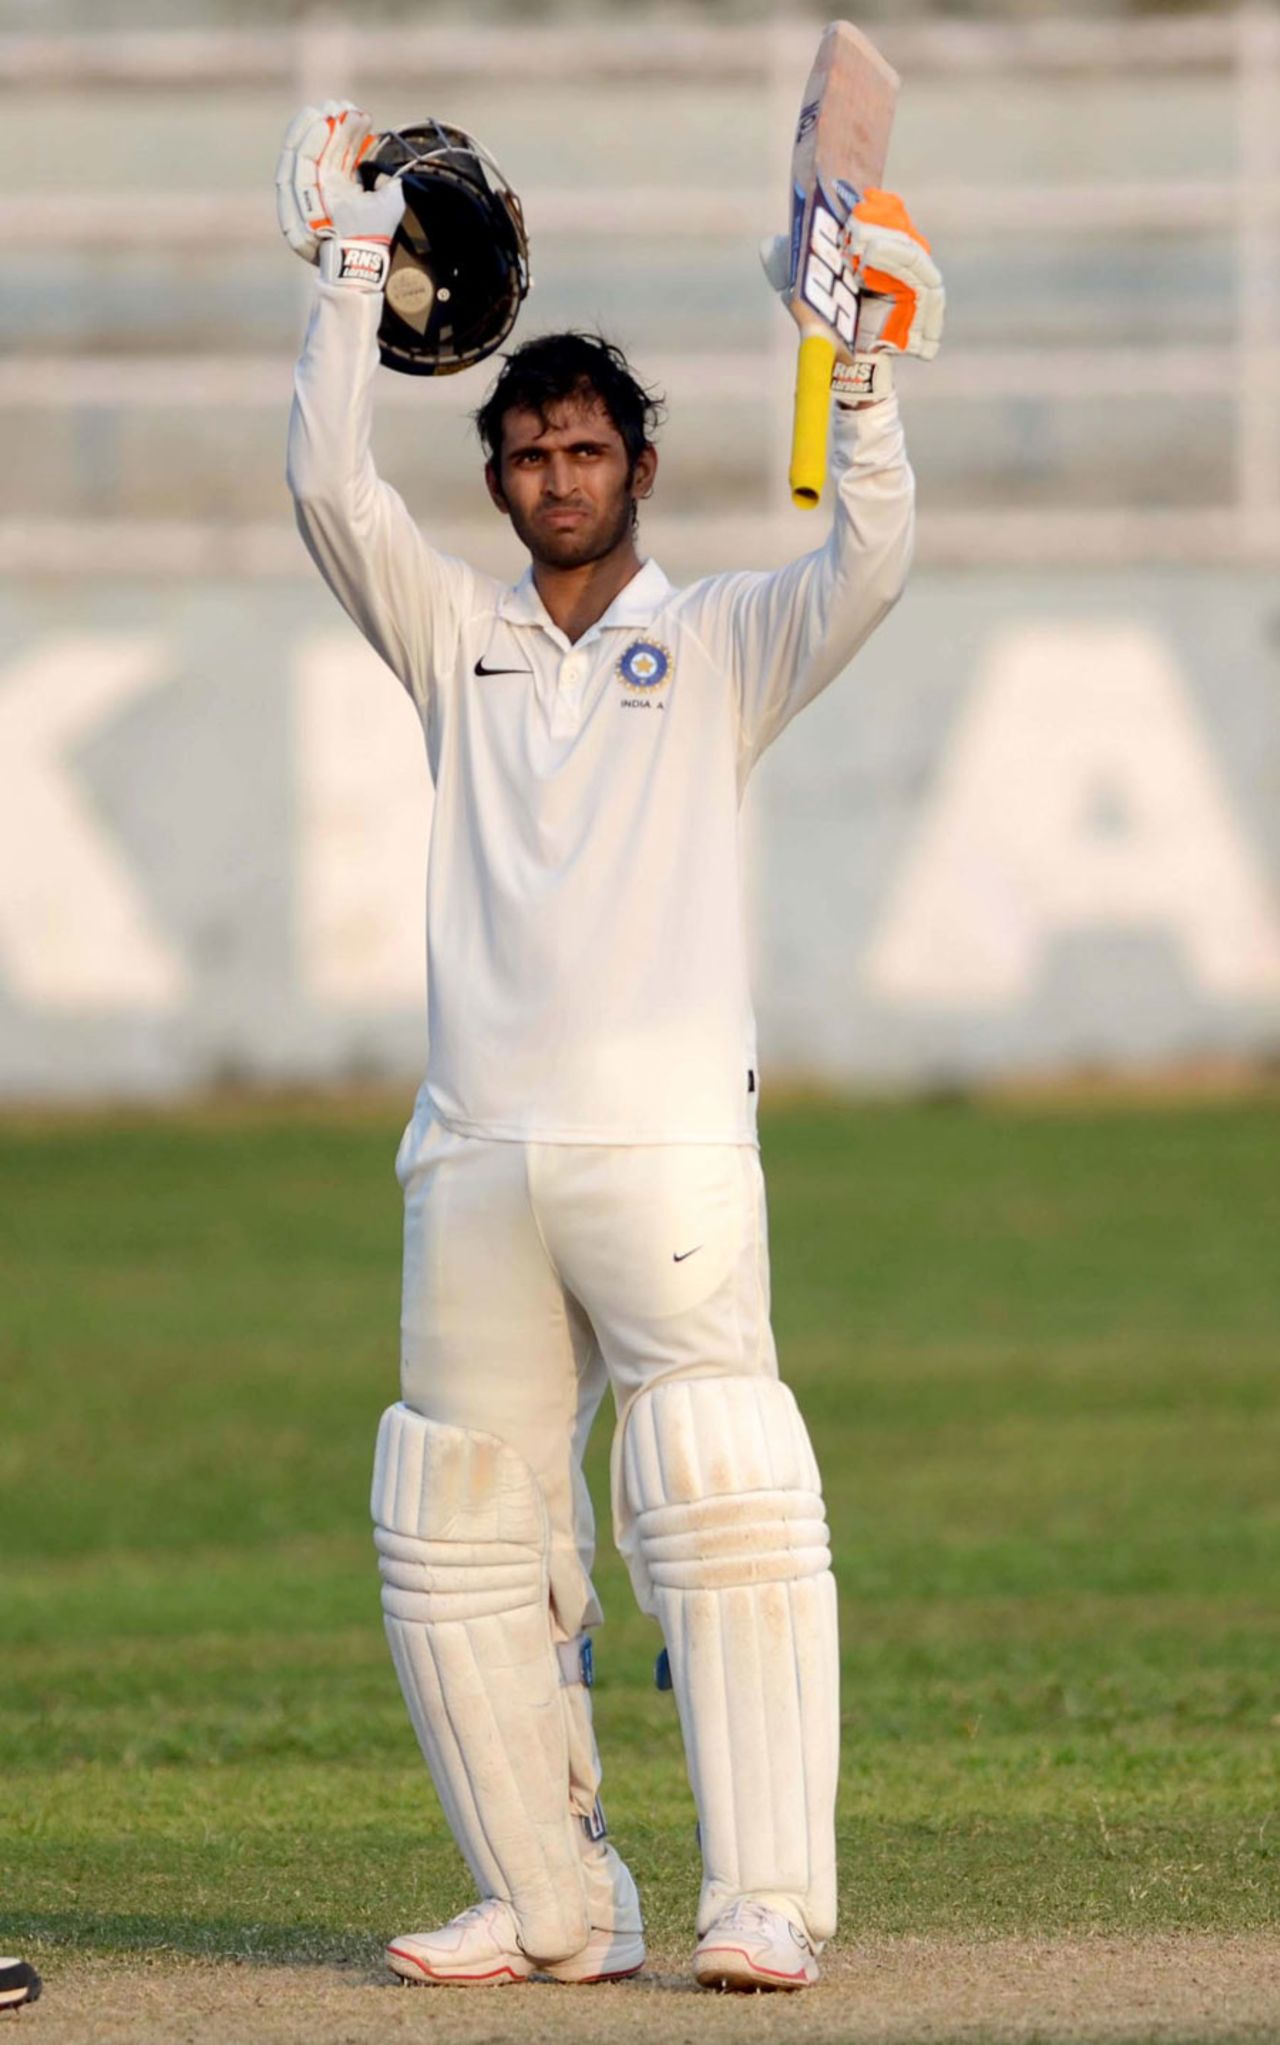 Abhishek Nayar raises his bat after reaching a century, India A v New Zealand A, 1st unofficial Test, day 3, Visakhapatnam, August 30, 2013